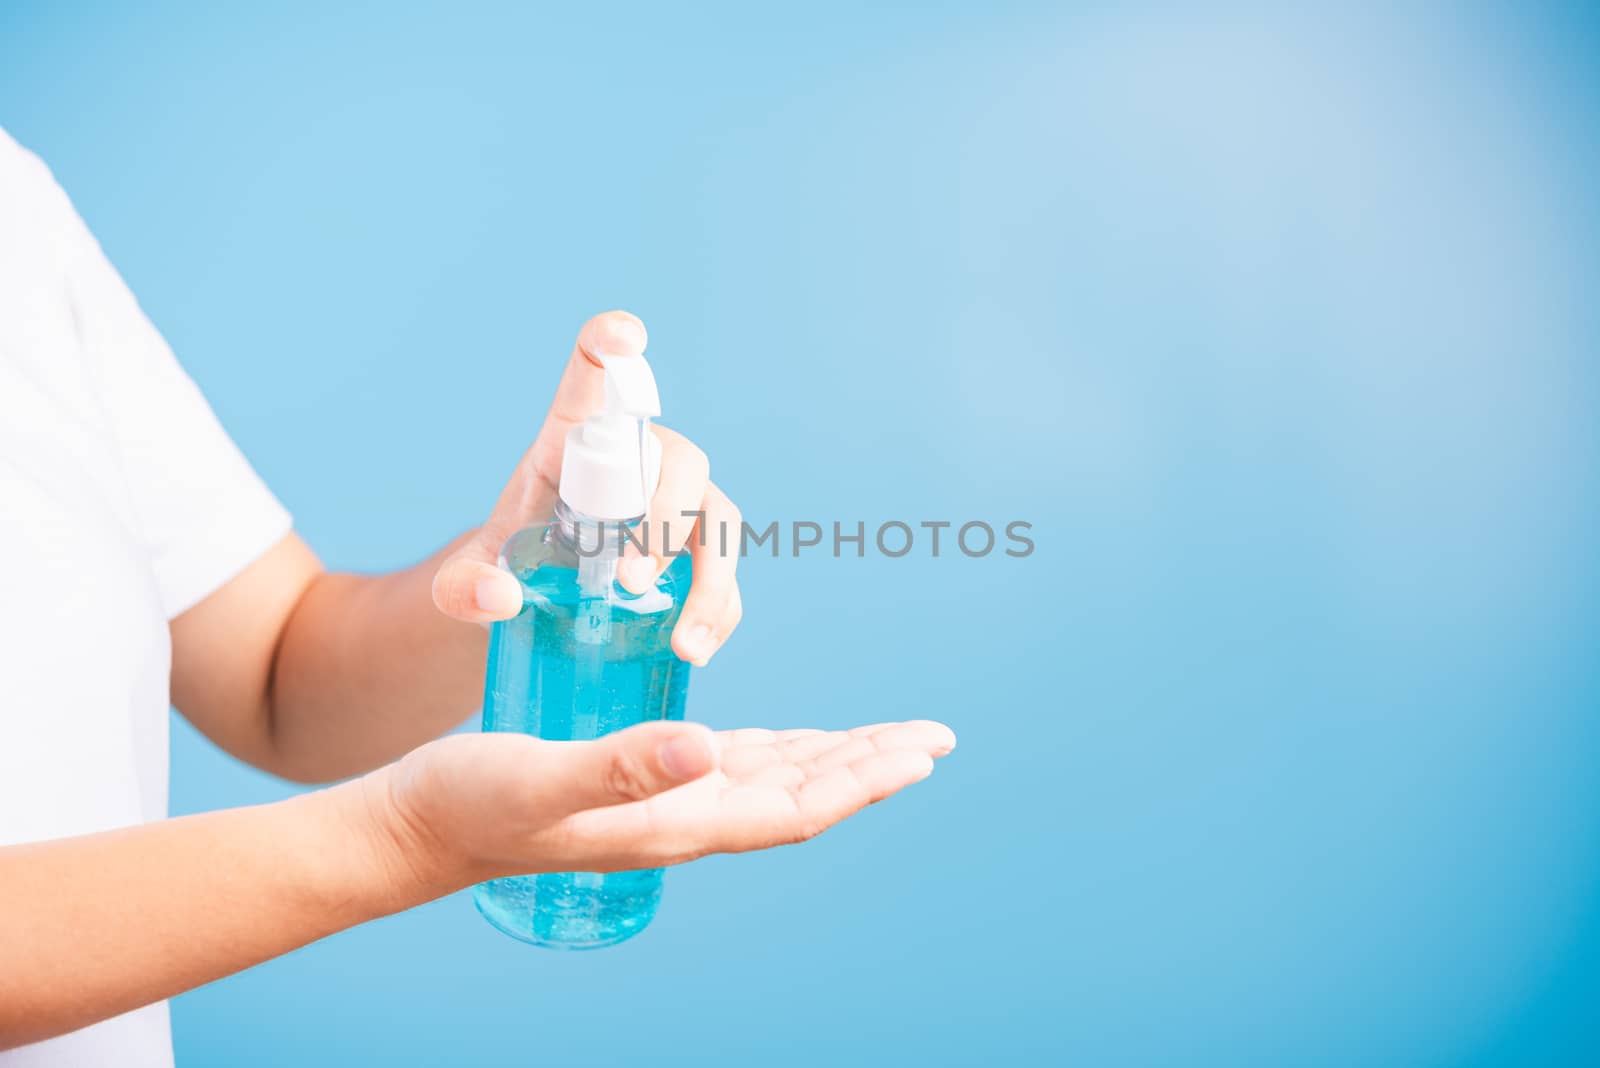 Closeup Hand Asian young woman applying pump dispenser sanitizer alcohol gel on hand wash cleaning, hygiene prevention COVID-19 or coronavirus protection concept, isolated on blue background